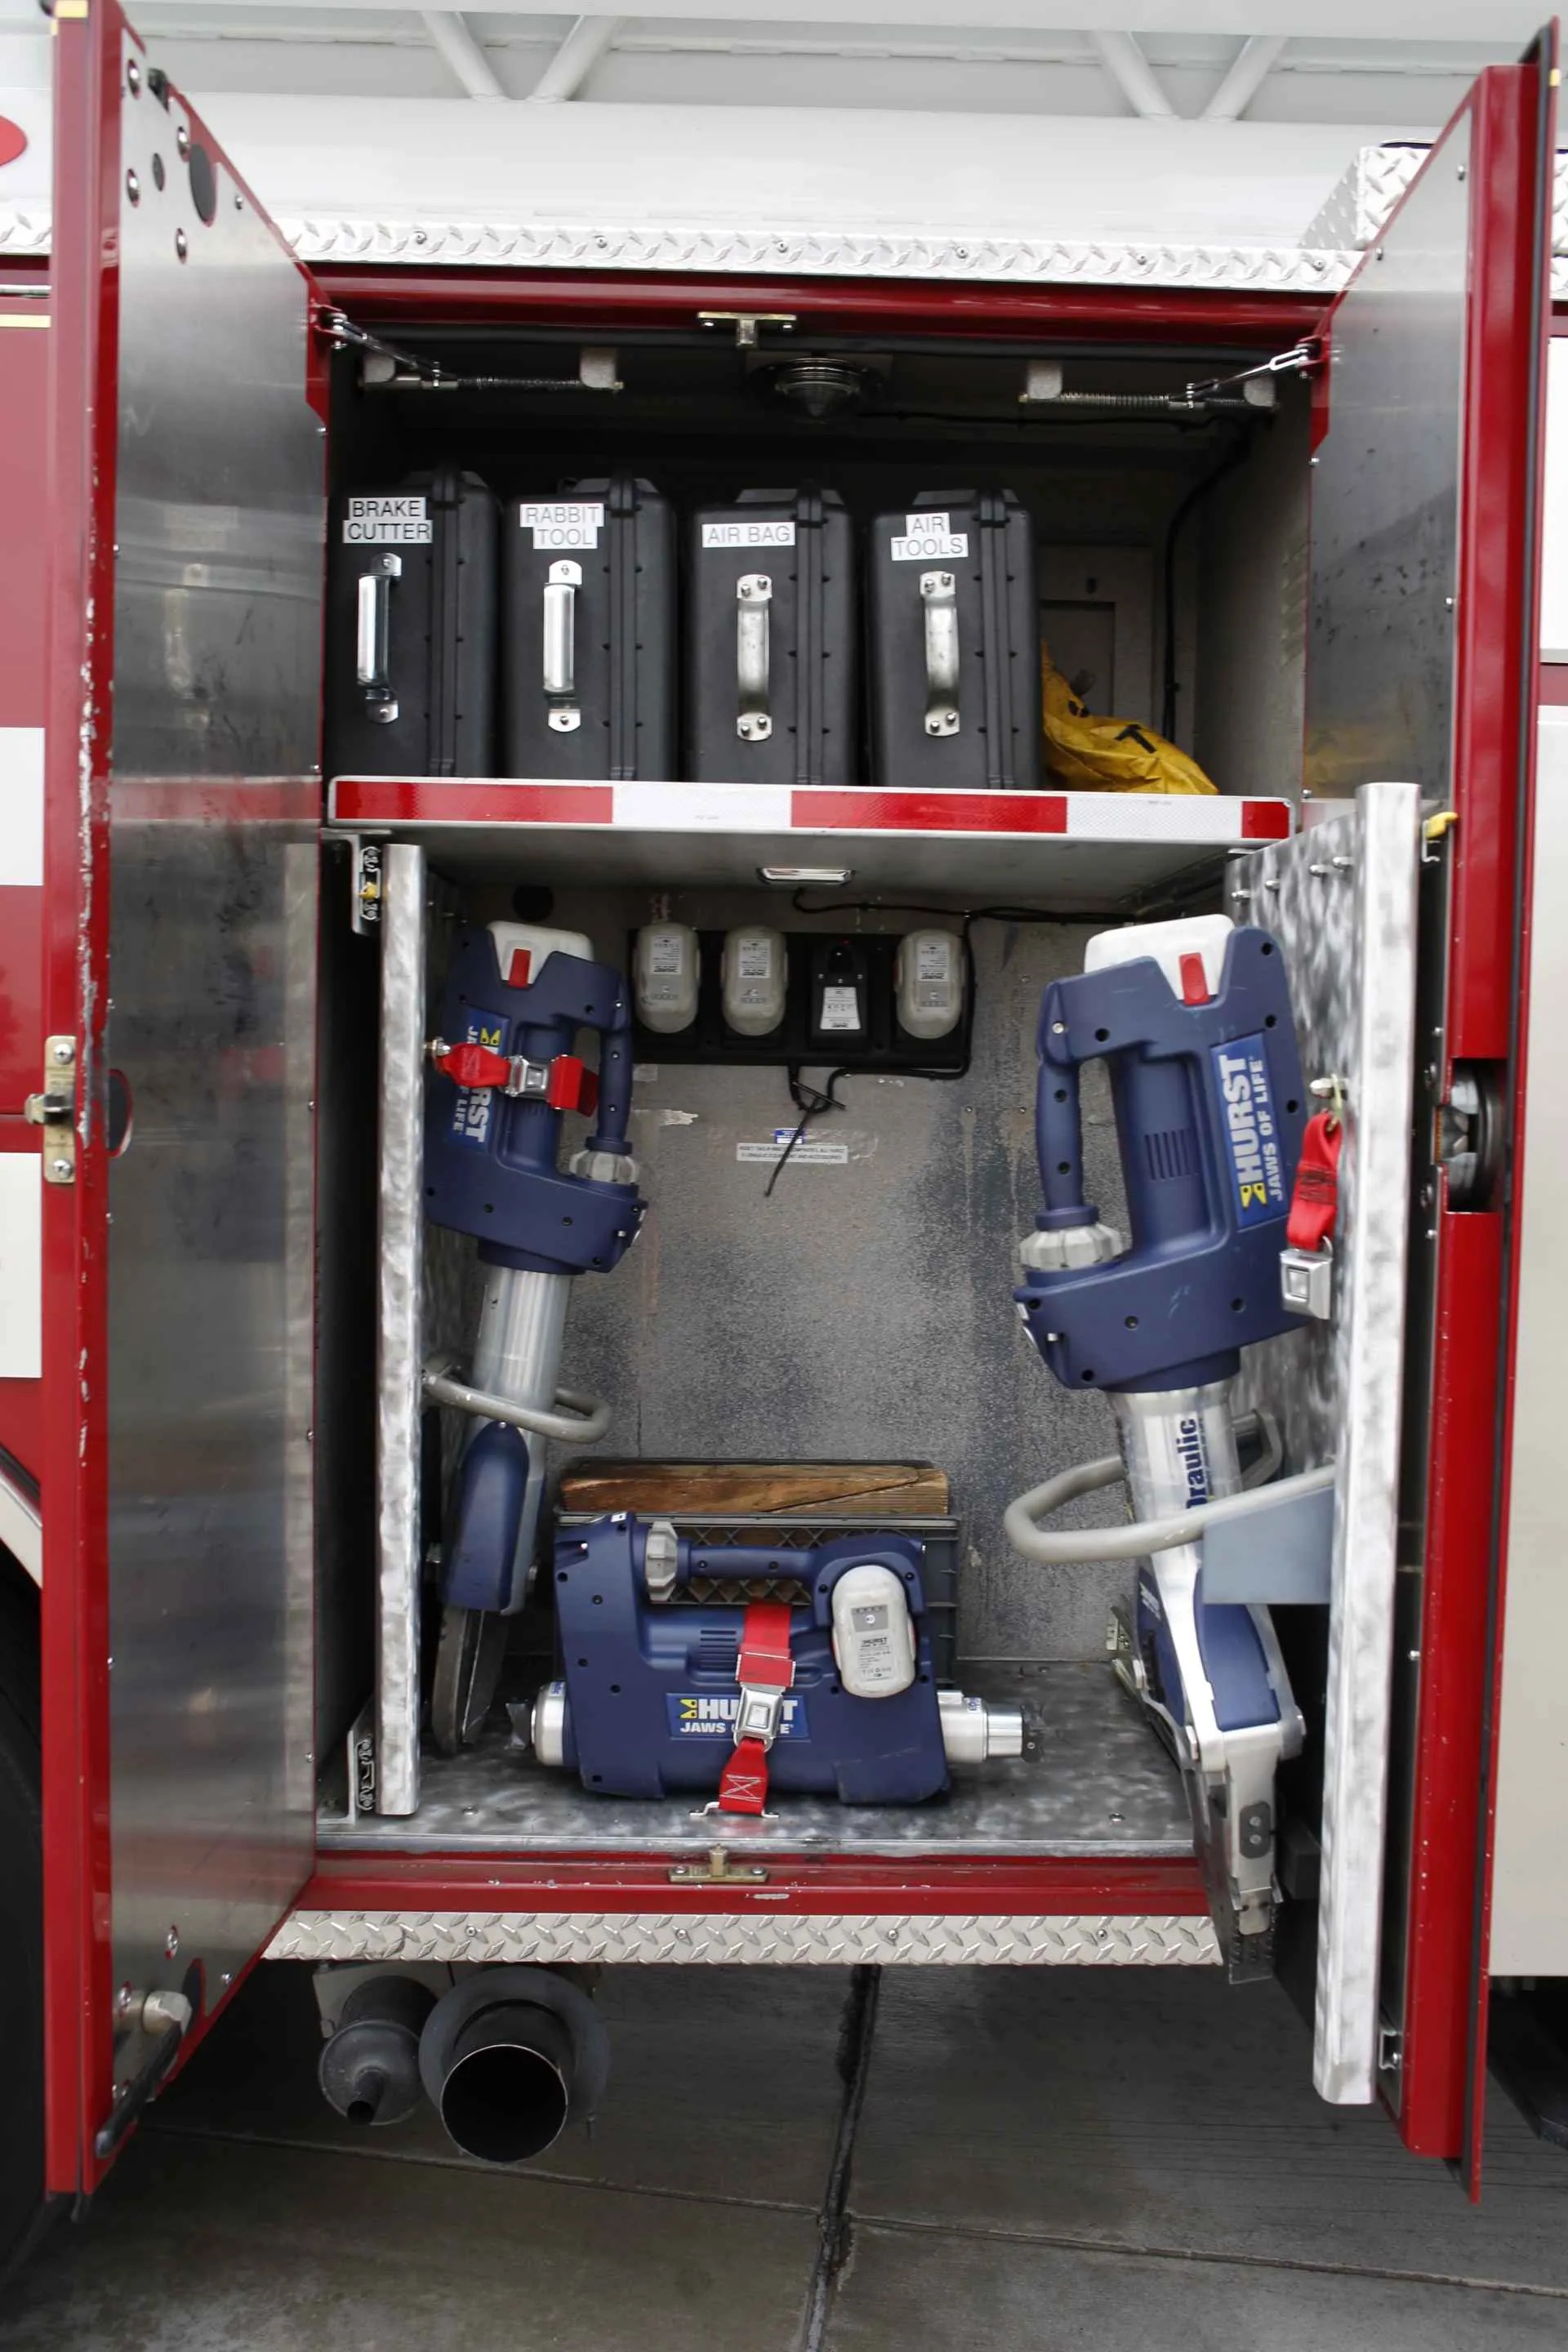 Accuride-9308-Lockin-lockout-slides-in-rescue-tool-compartment.jpg.webp